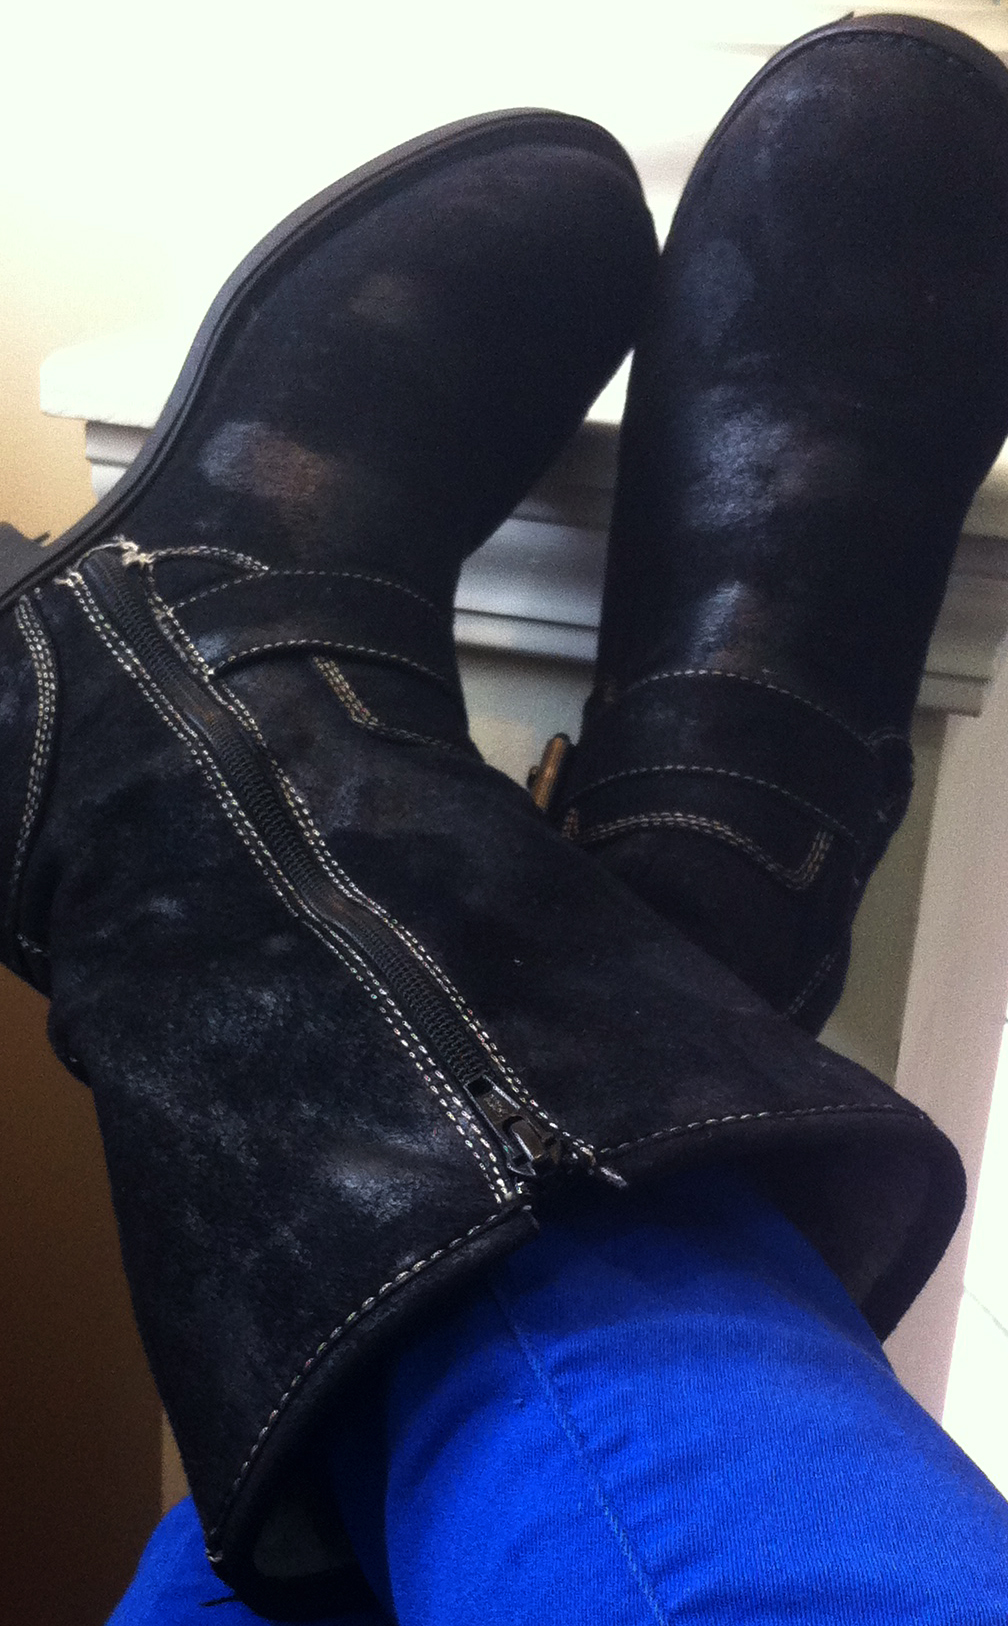 Black faux suede Decree boots beat up battered trusty old